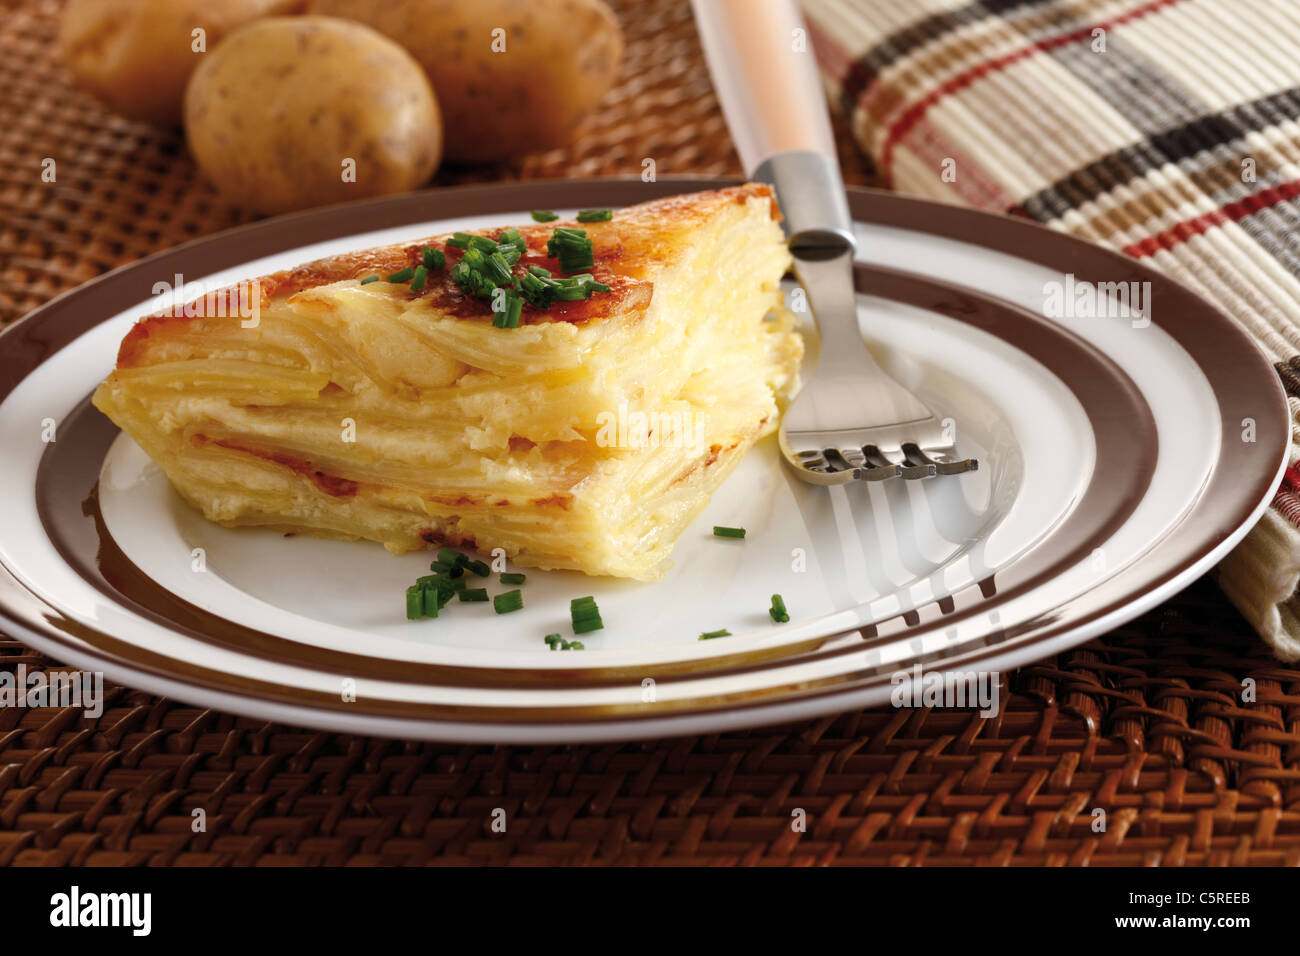 Piece of potato bake on plate, elevated view Stock Photo